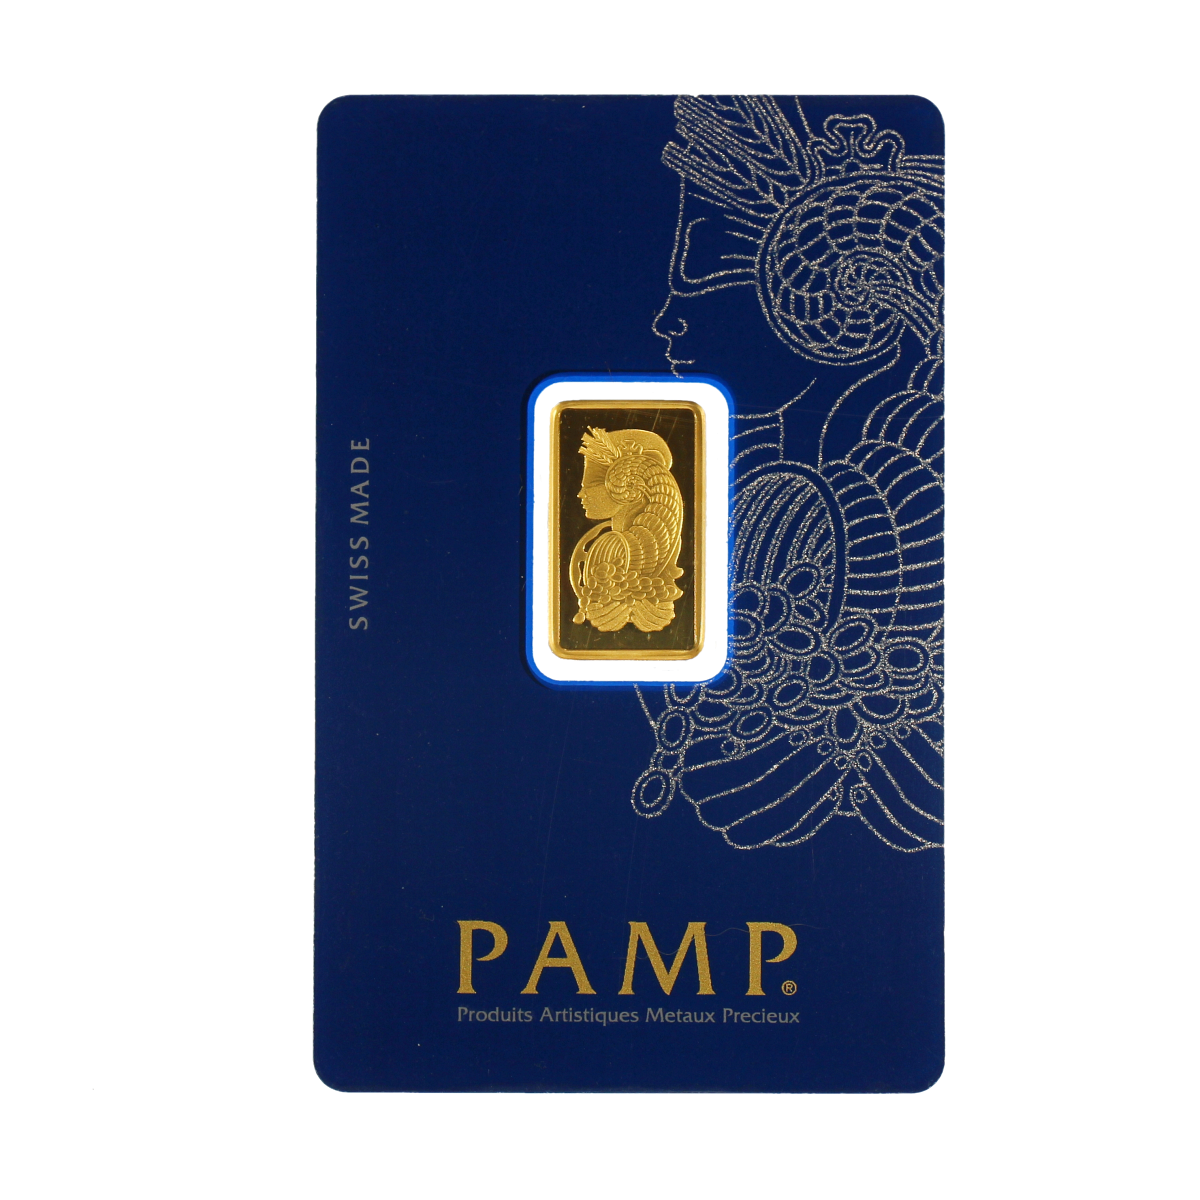  5 Gram Pamp Suisse Fortuna Veriscan Gold Bar (New with Assay)